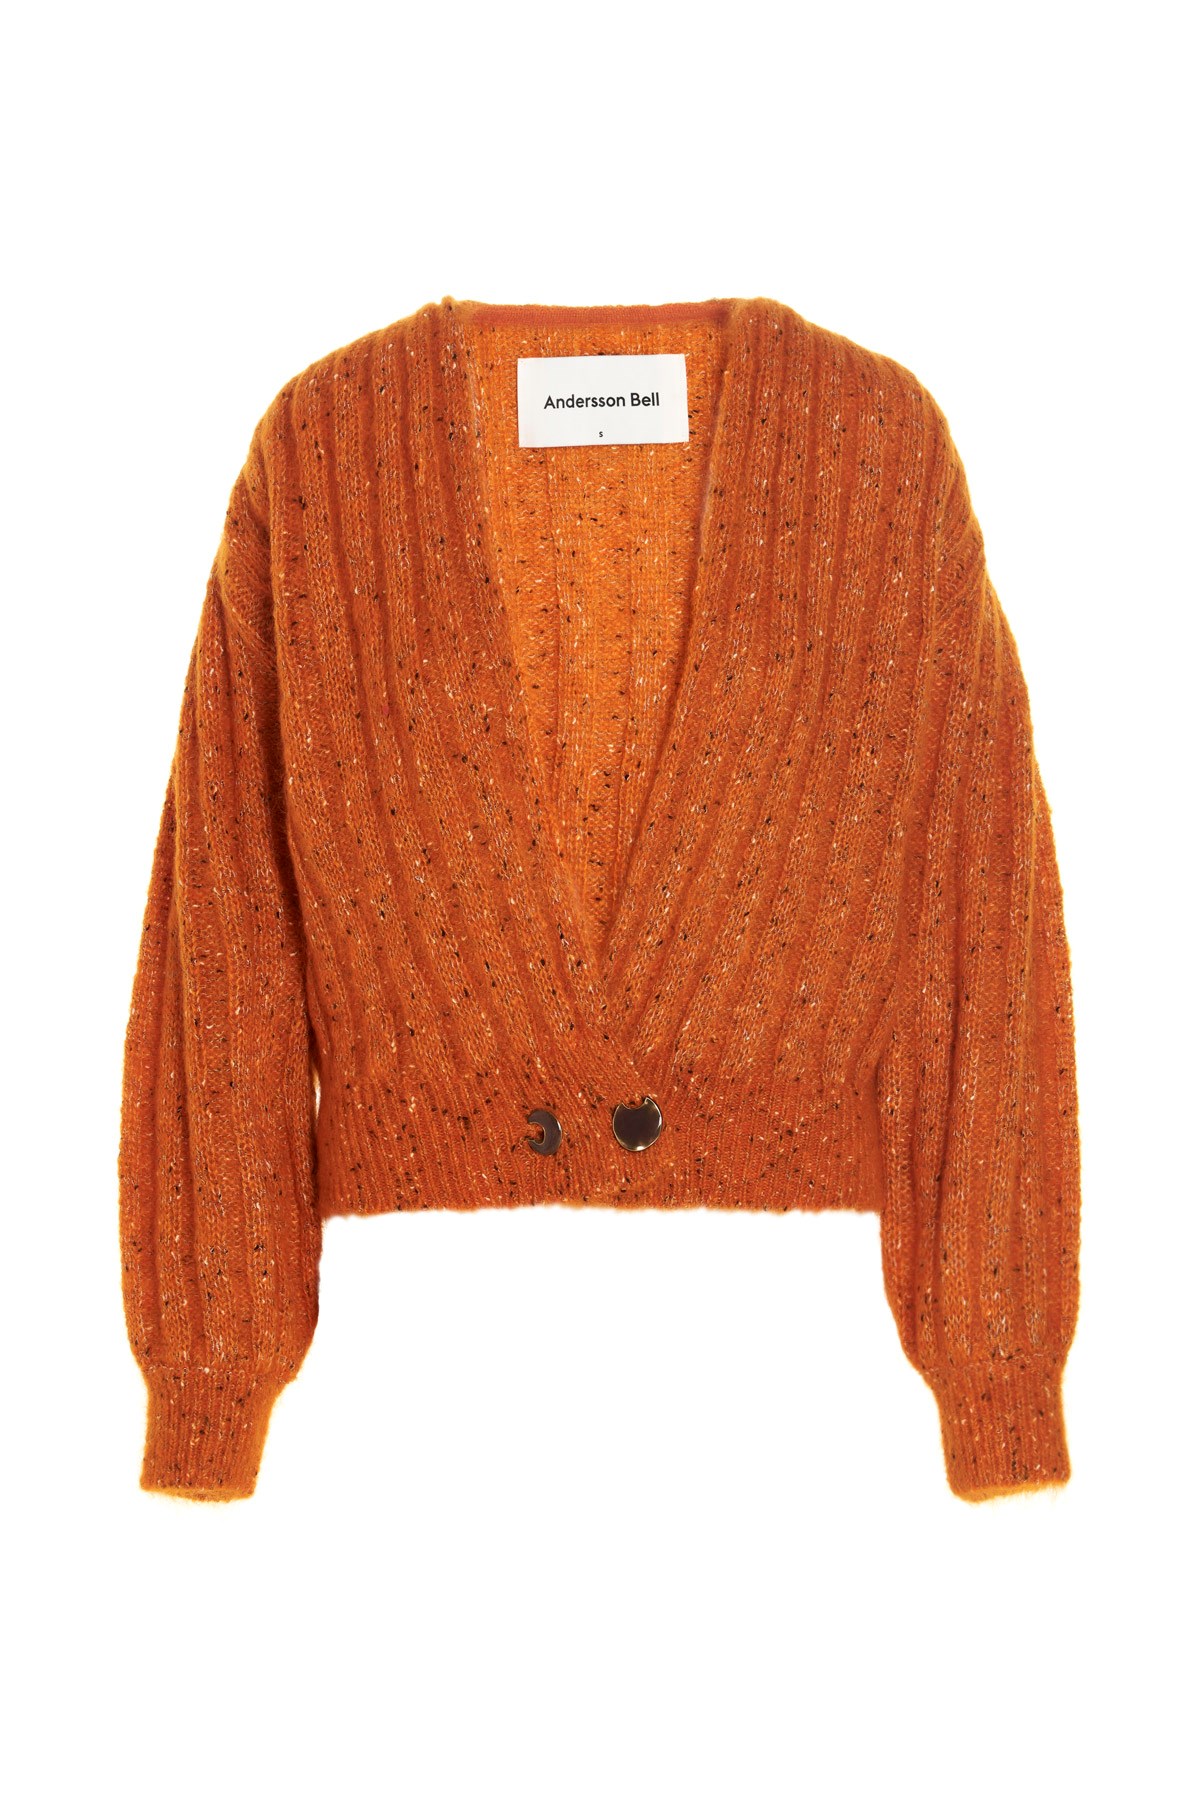 ANDERSSON BELL 'Connely' Cardigan